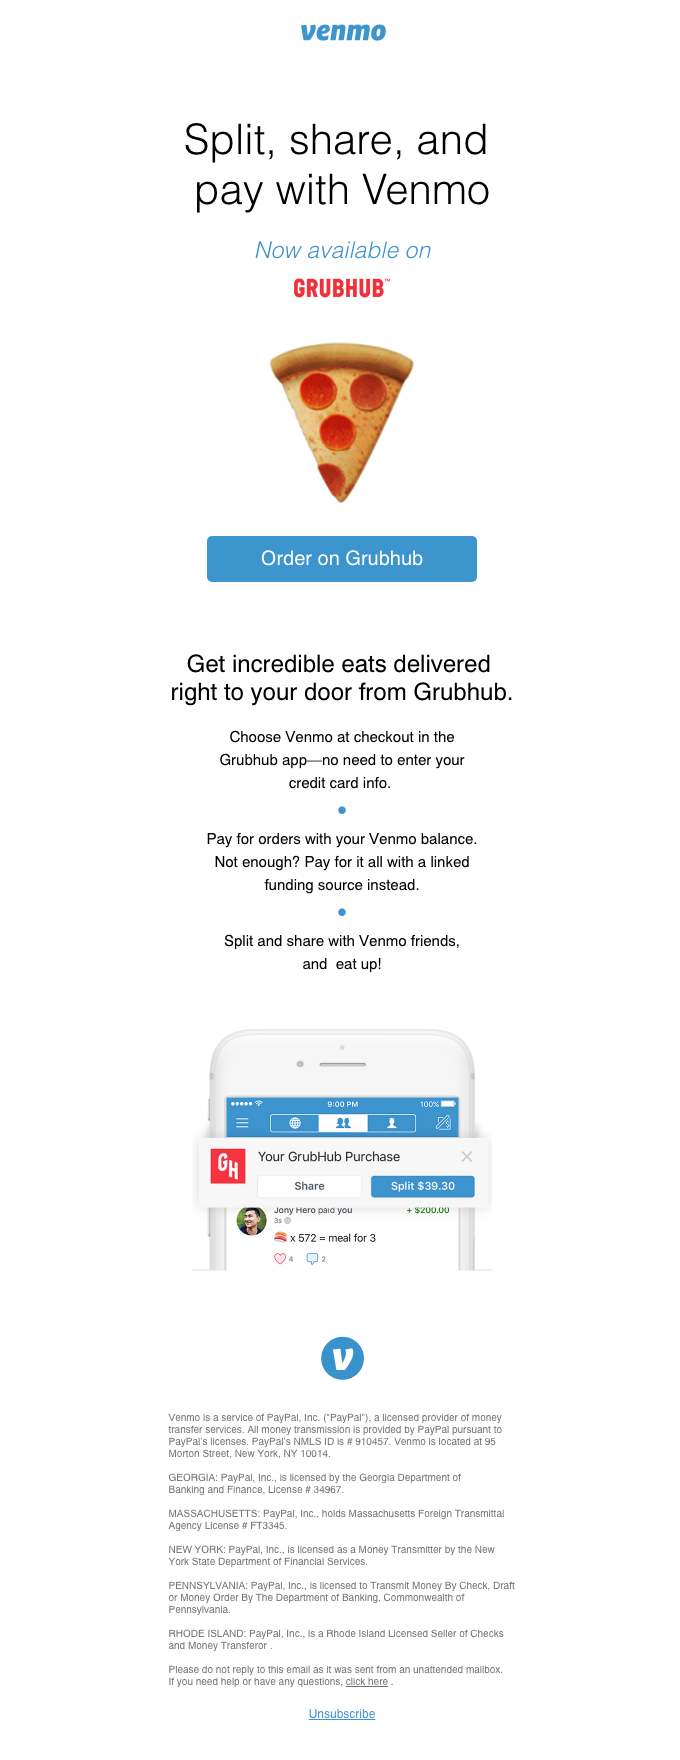 Ordering on Grubhub? Now you can pay with Venmo!